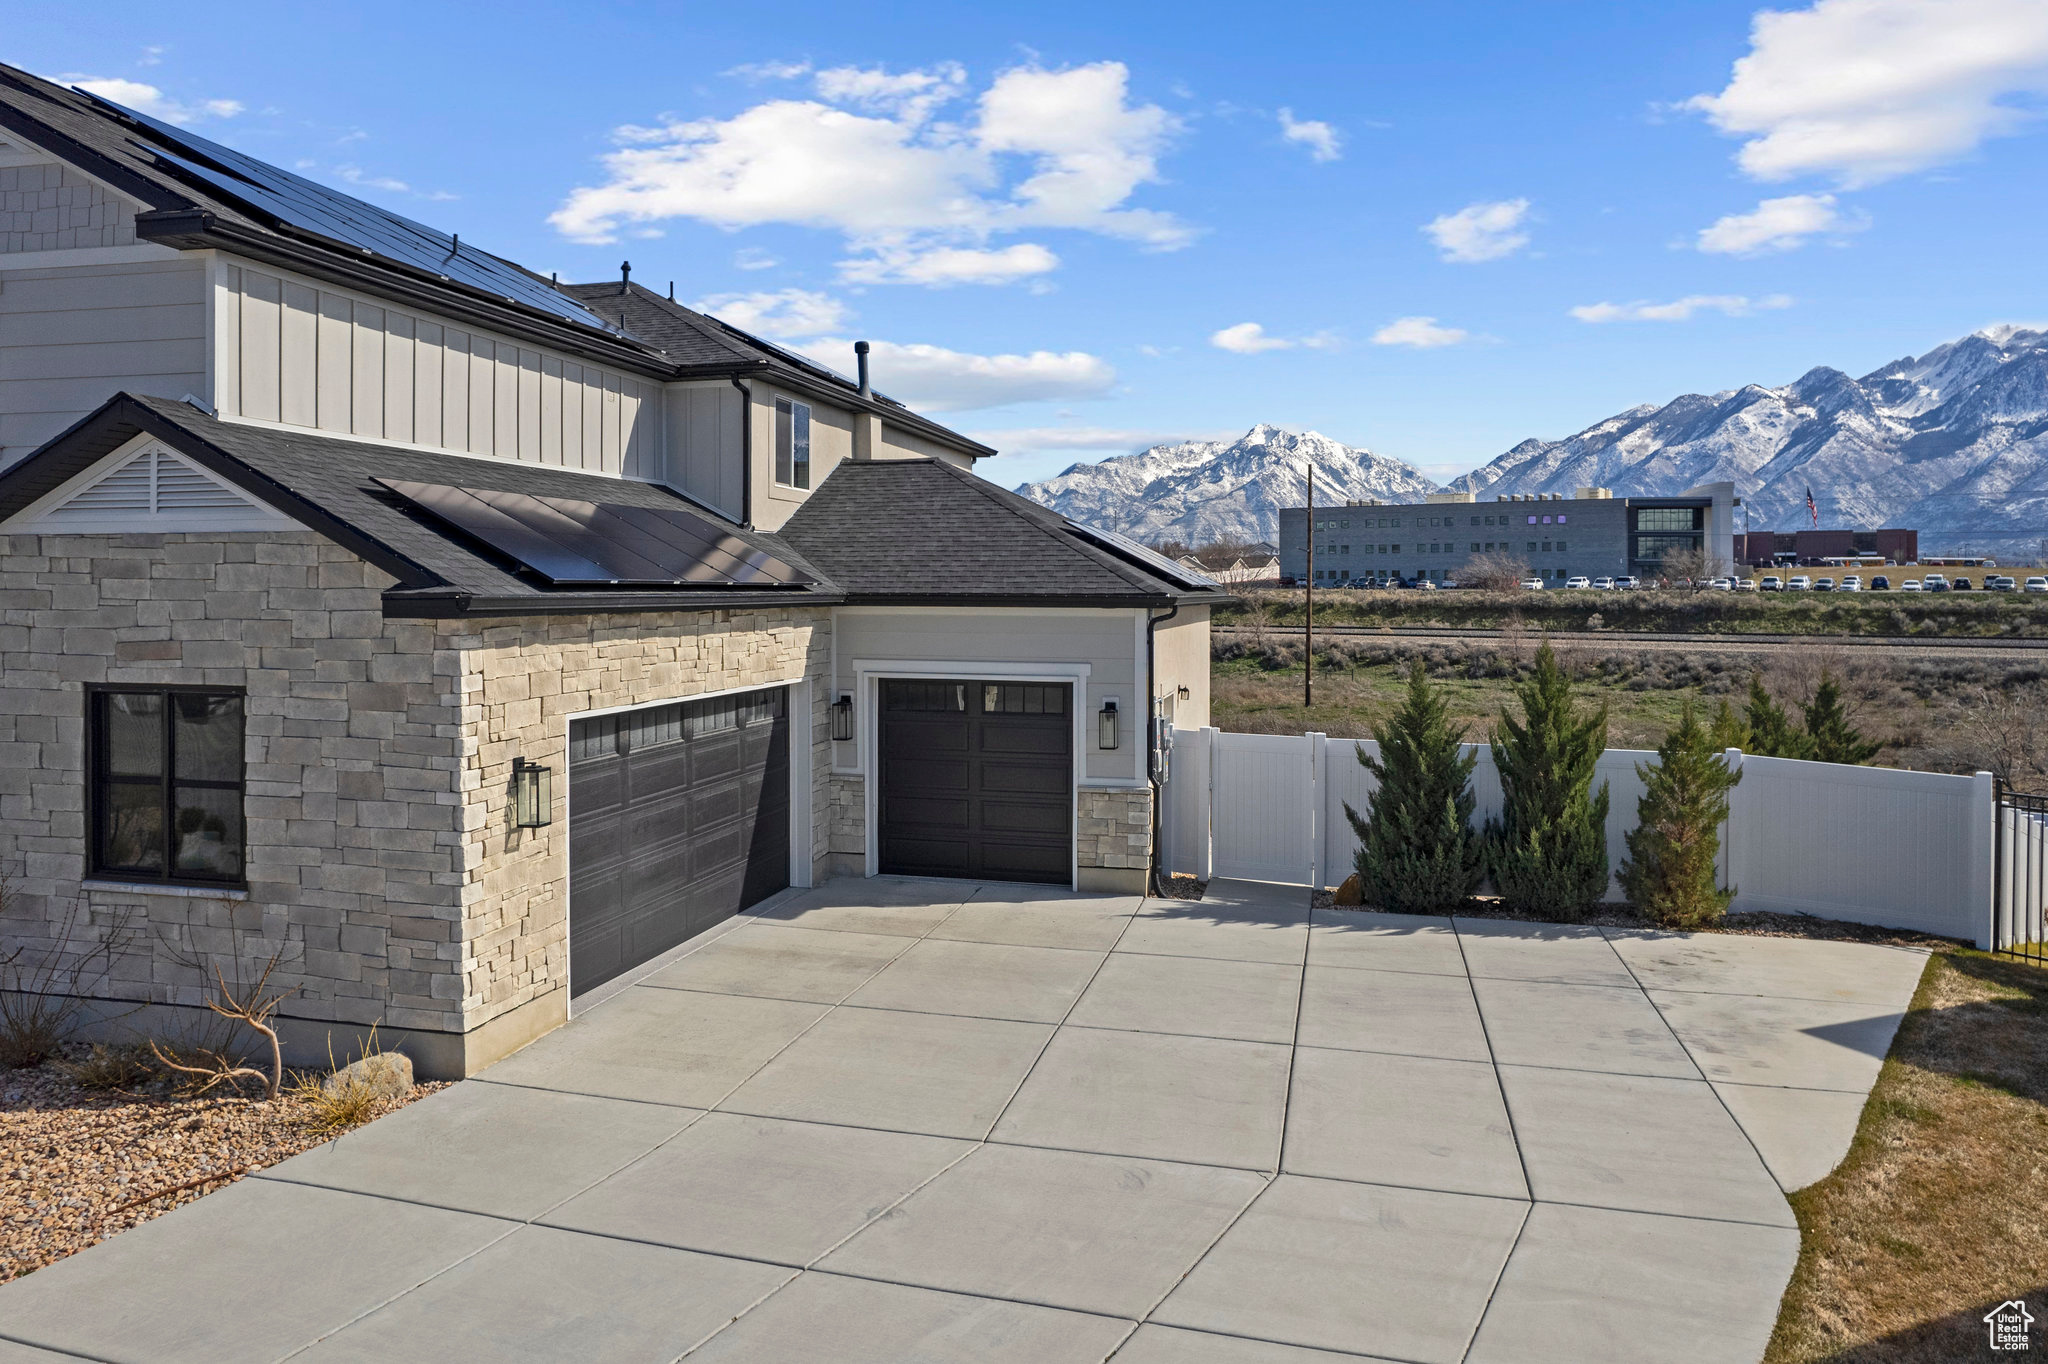 View of home's exterior featuring a mountain view, solar panels, and a garage